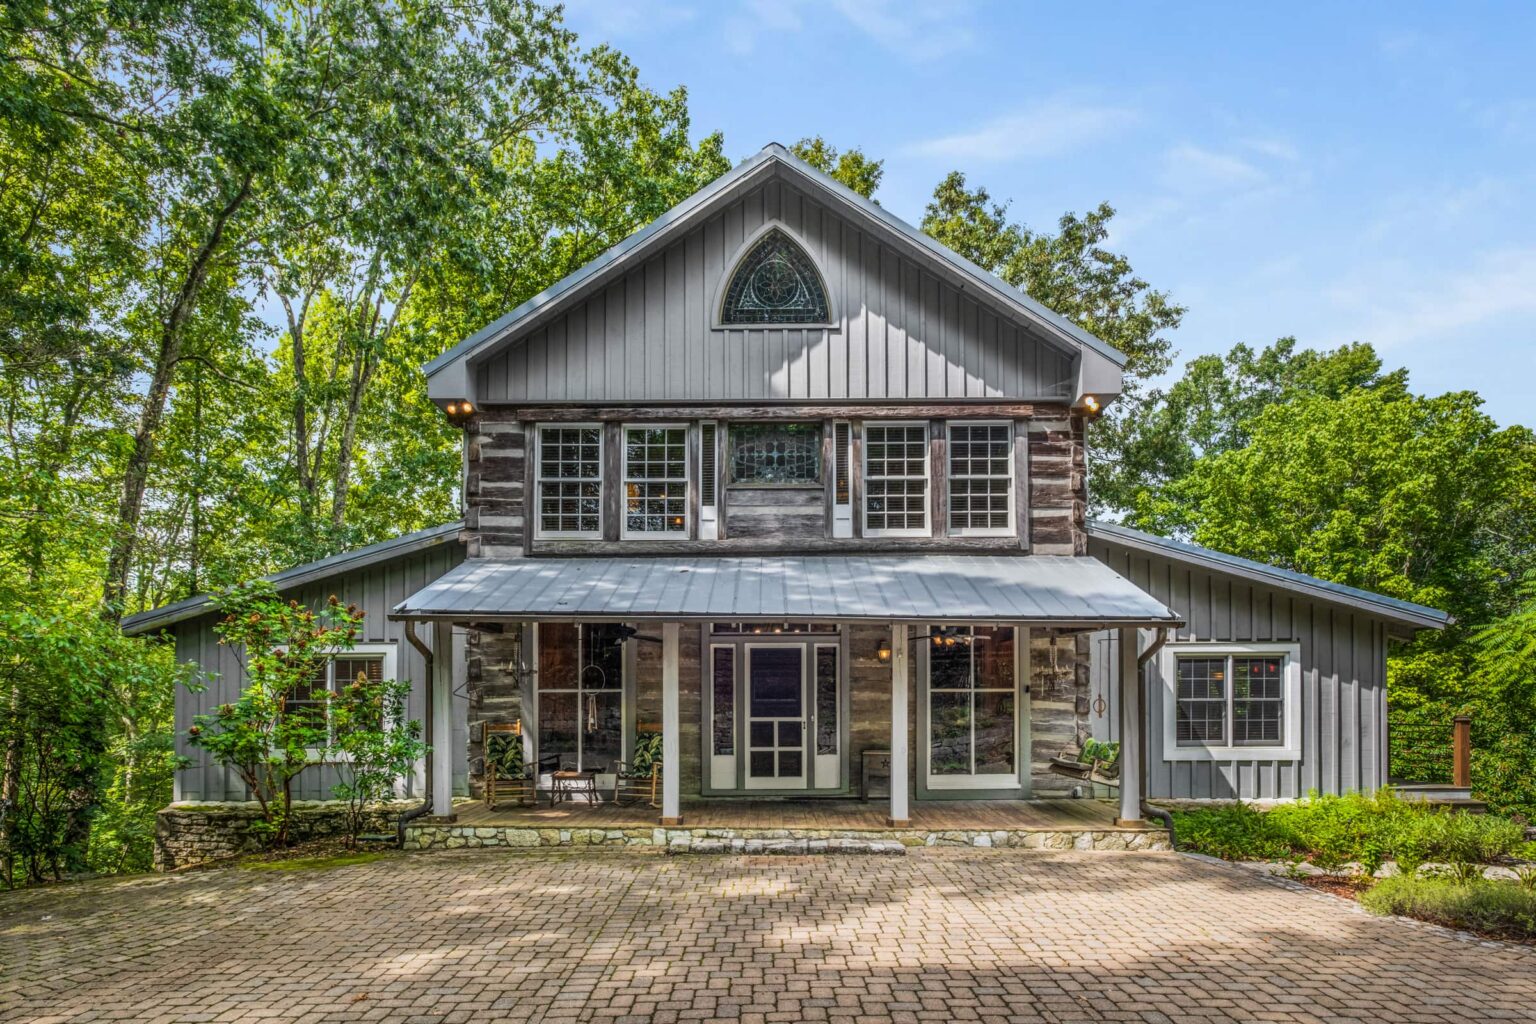 Johnny Cash's custom-built home for his son hits the market for $6.25 million. Rustic charm and serene woodland setting await in Hendersonville, Tennessee.